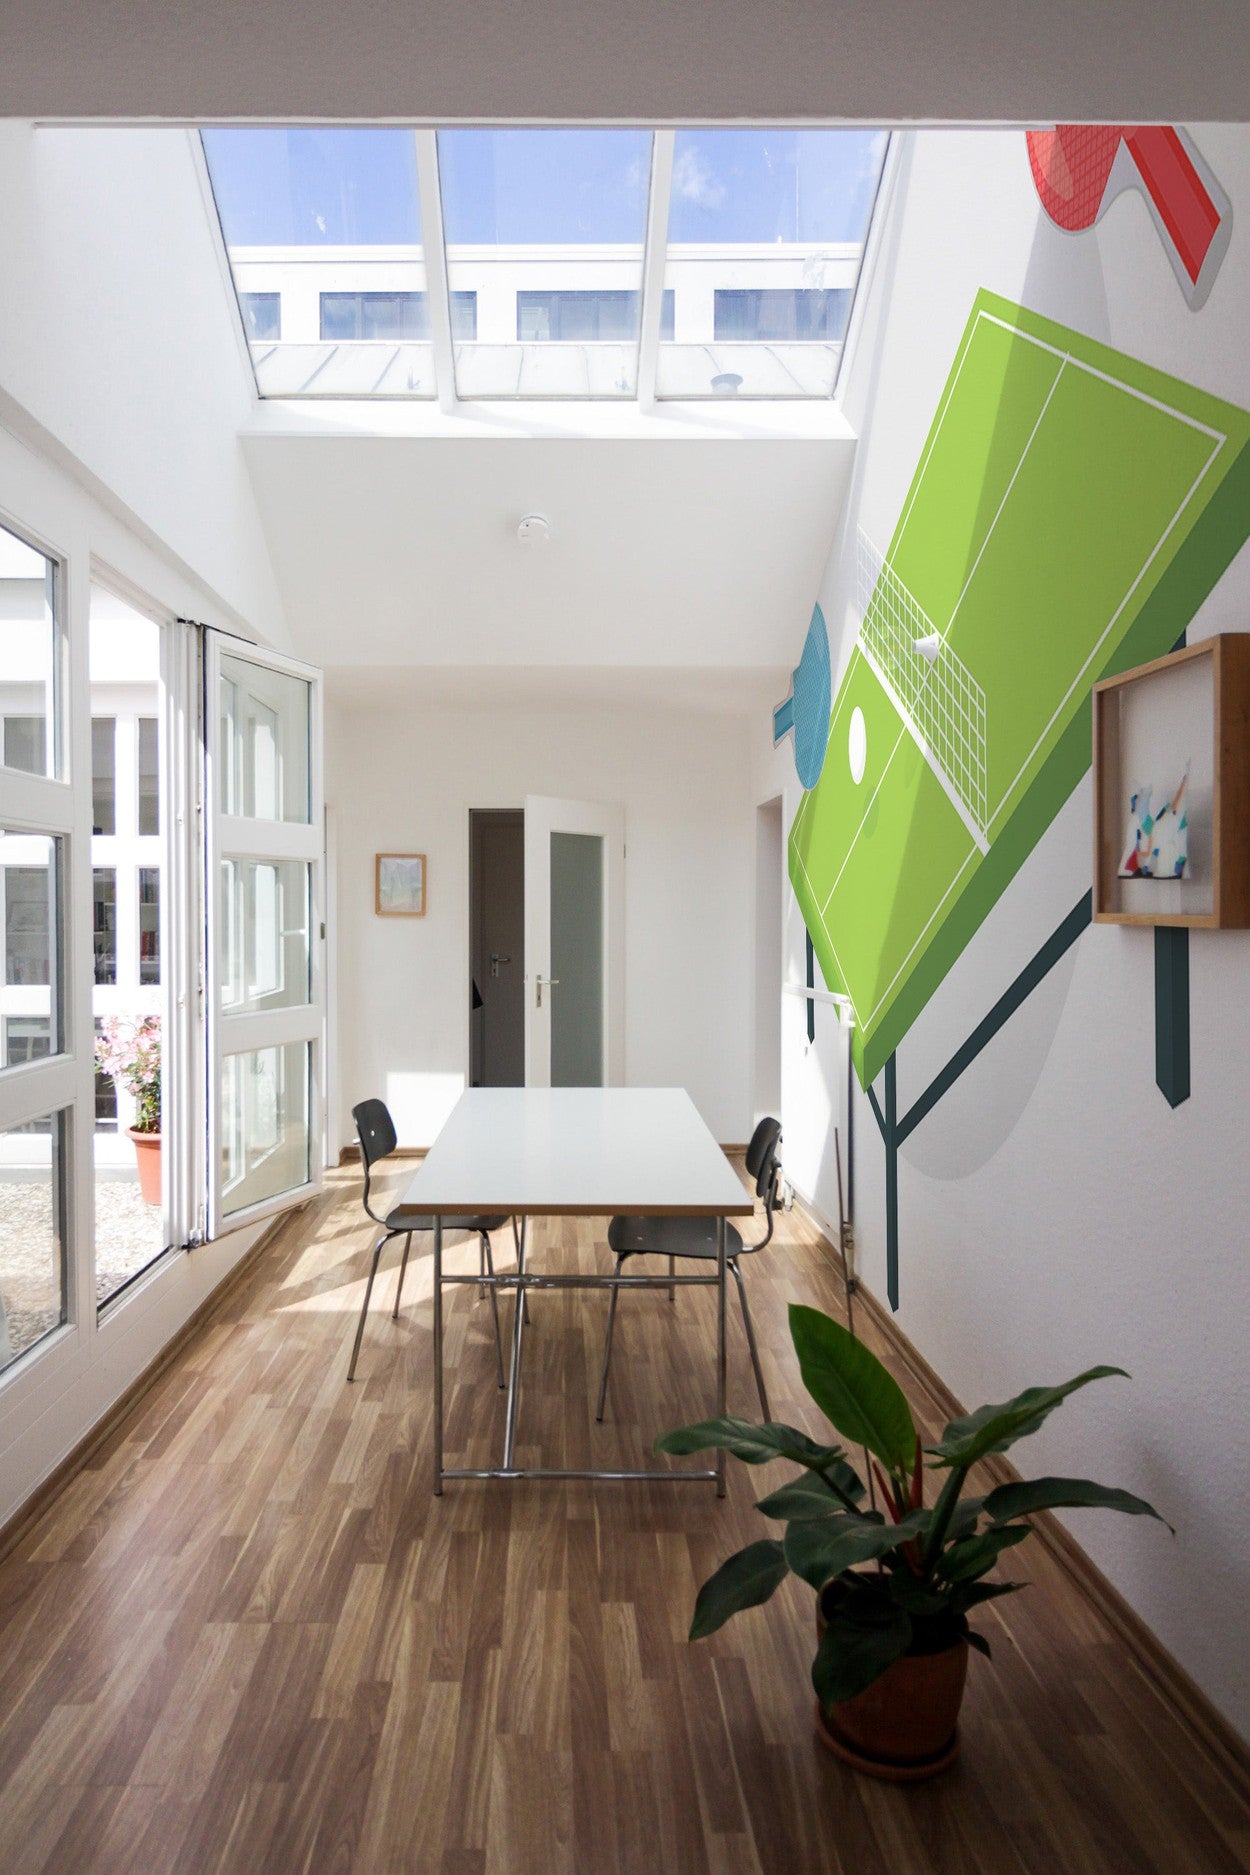 Bright room with skylight windows, wooden flooring, a simple table and chairs, and a large wall mural of a tennis court.